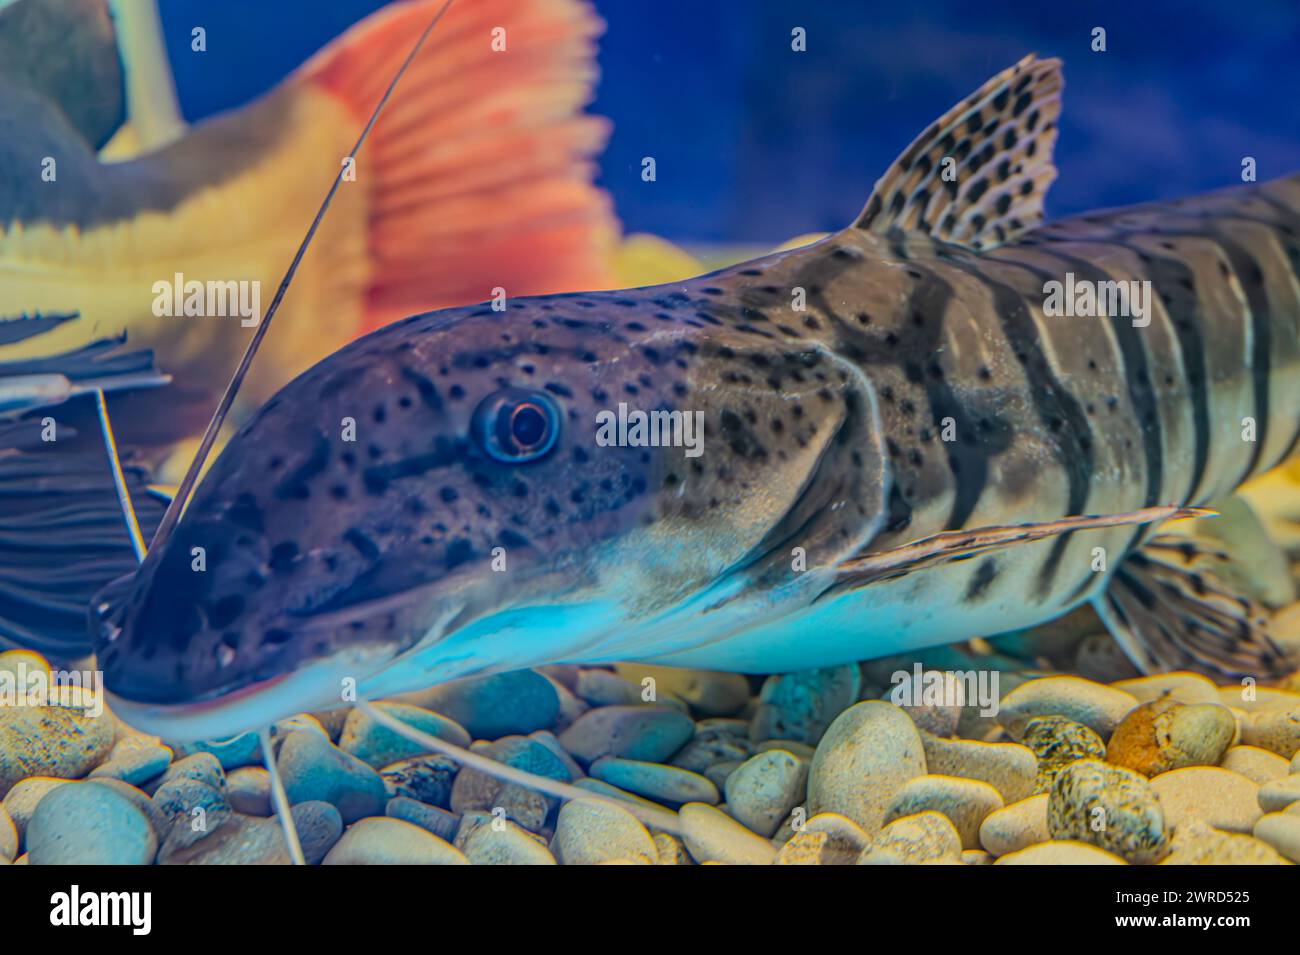 tiger shovelnose catfish swimming in a tank with a decorative ornament. The catfish has a patterned body with distinctive barbels. leopart catfish or Stock Photo